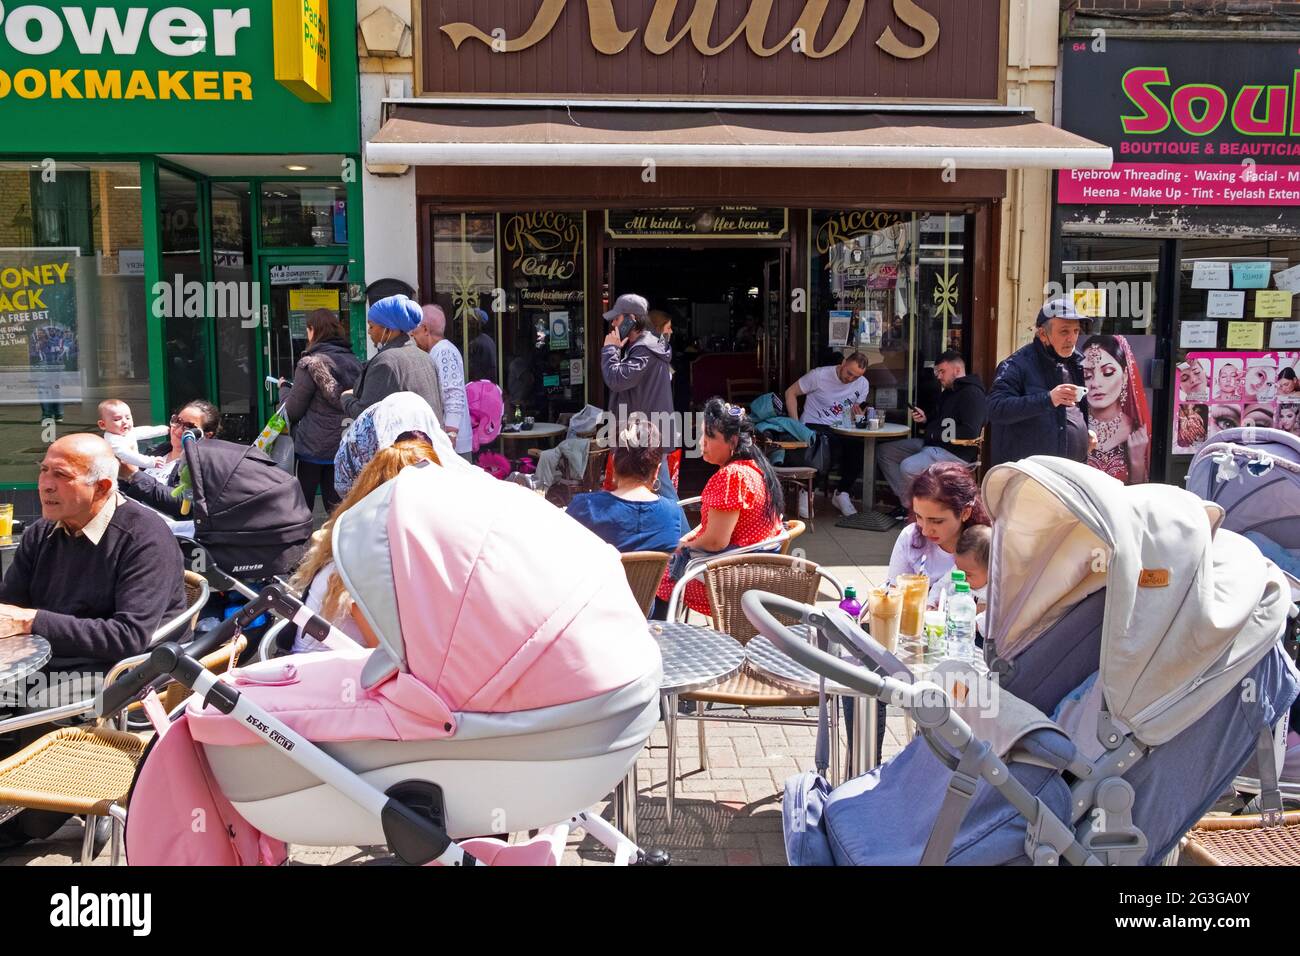 Customers people mothers & prams sitting eating and drinking at tables  outside Ricco's restaurant Walthamstow High Street London E17 UK KATHY DEWITT Stock Photo